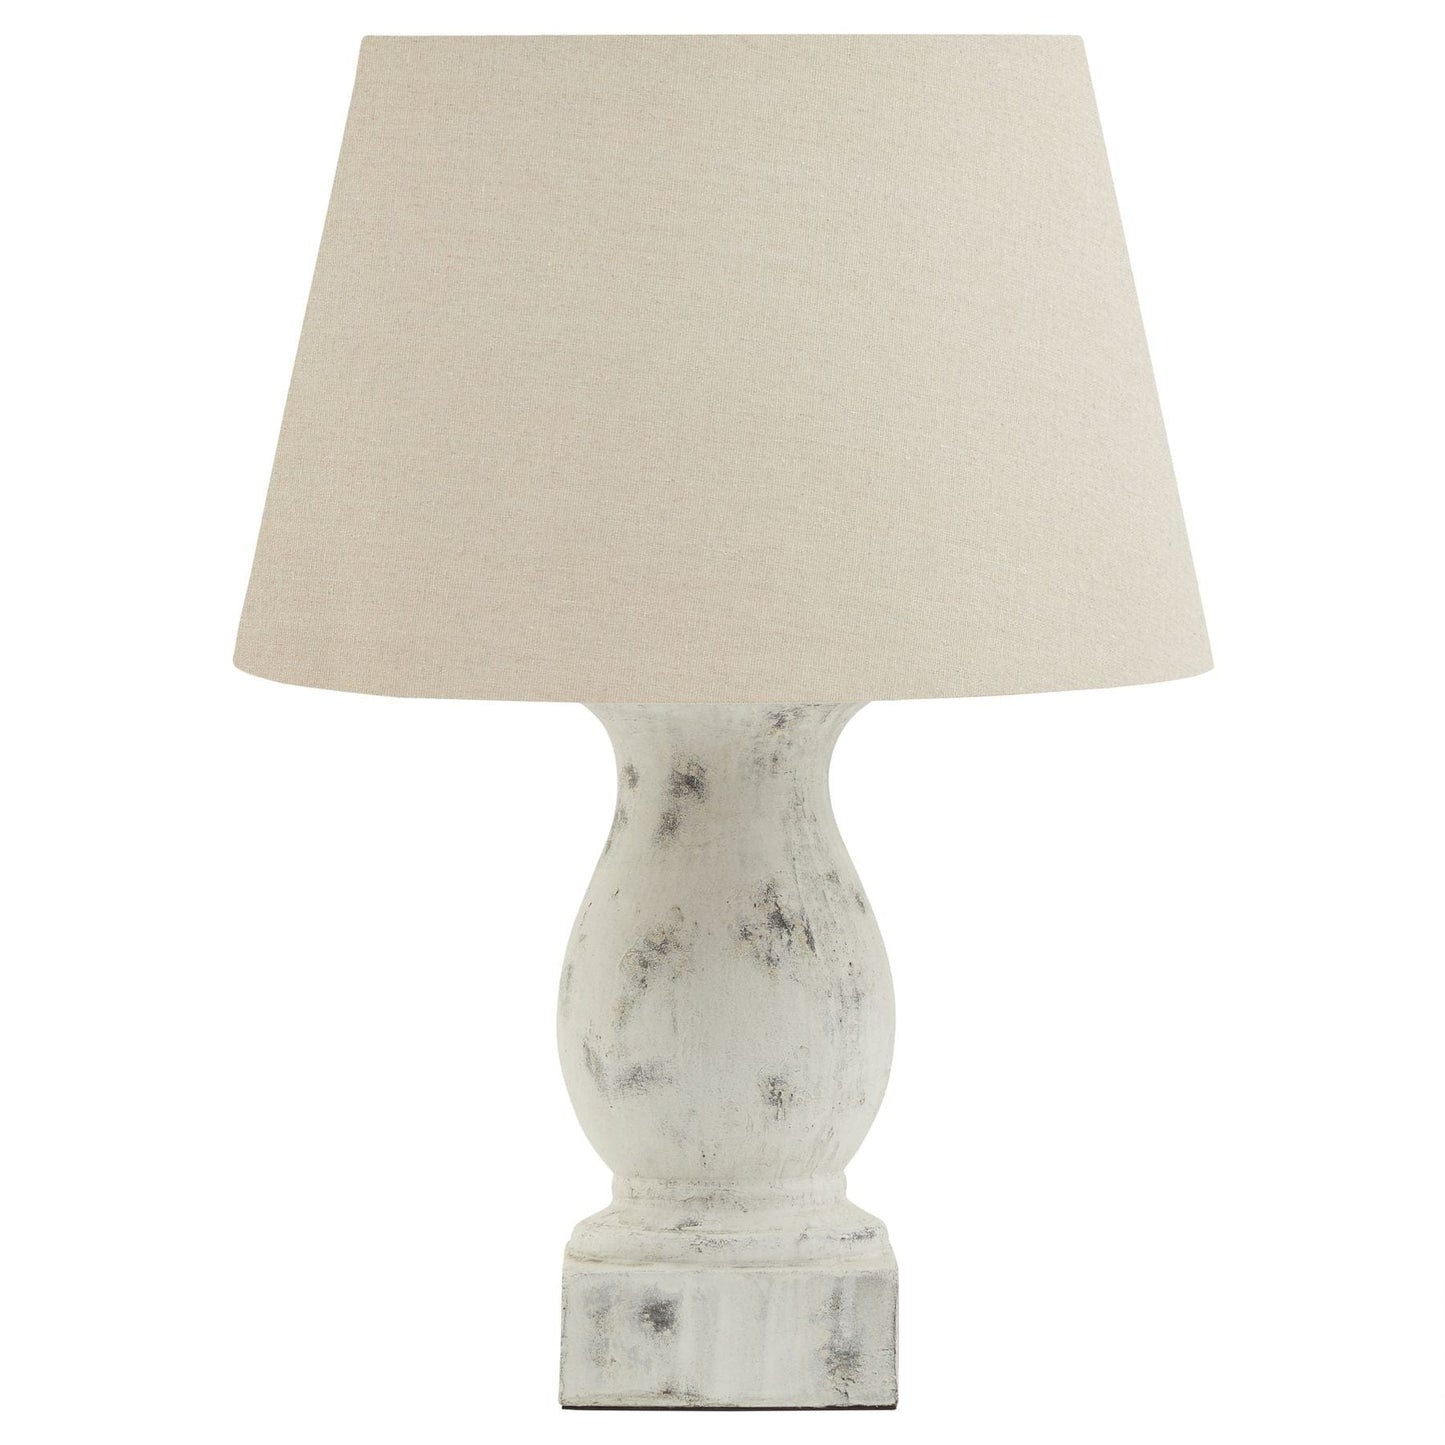 Hill Interiors Table Lamp Darcy Antique White Pillar Table Lamp With Linen Shade